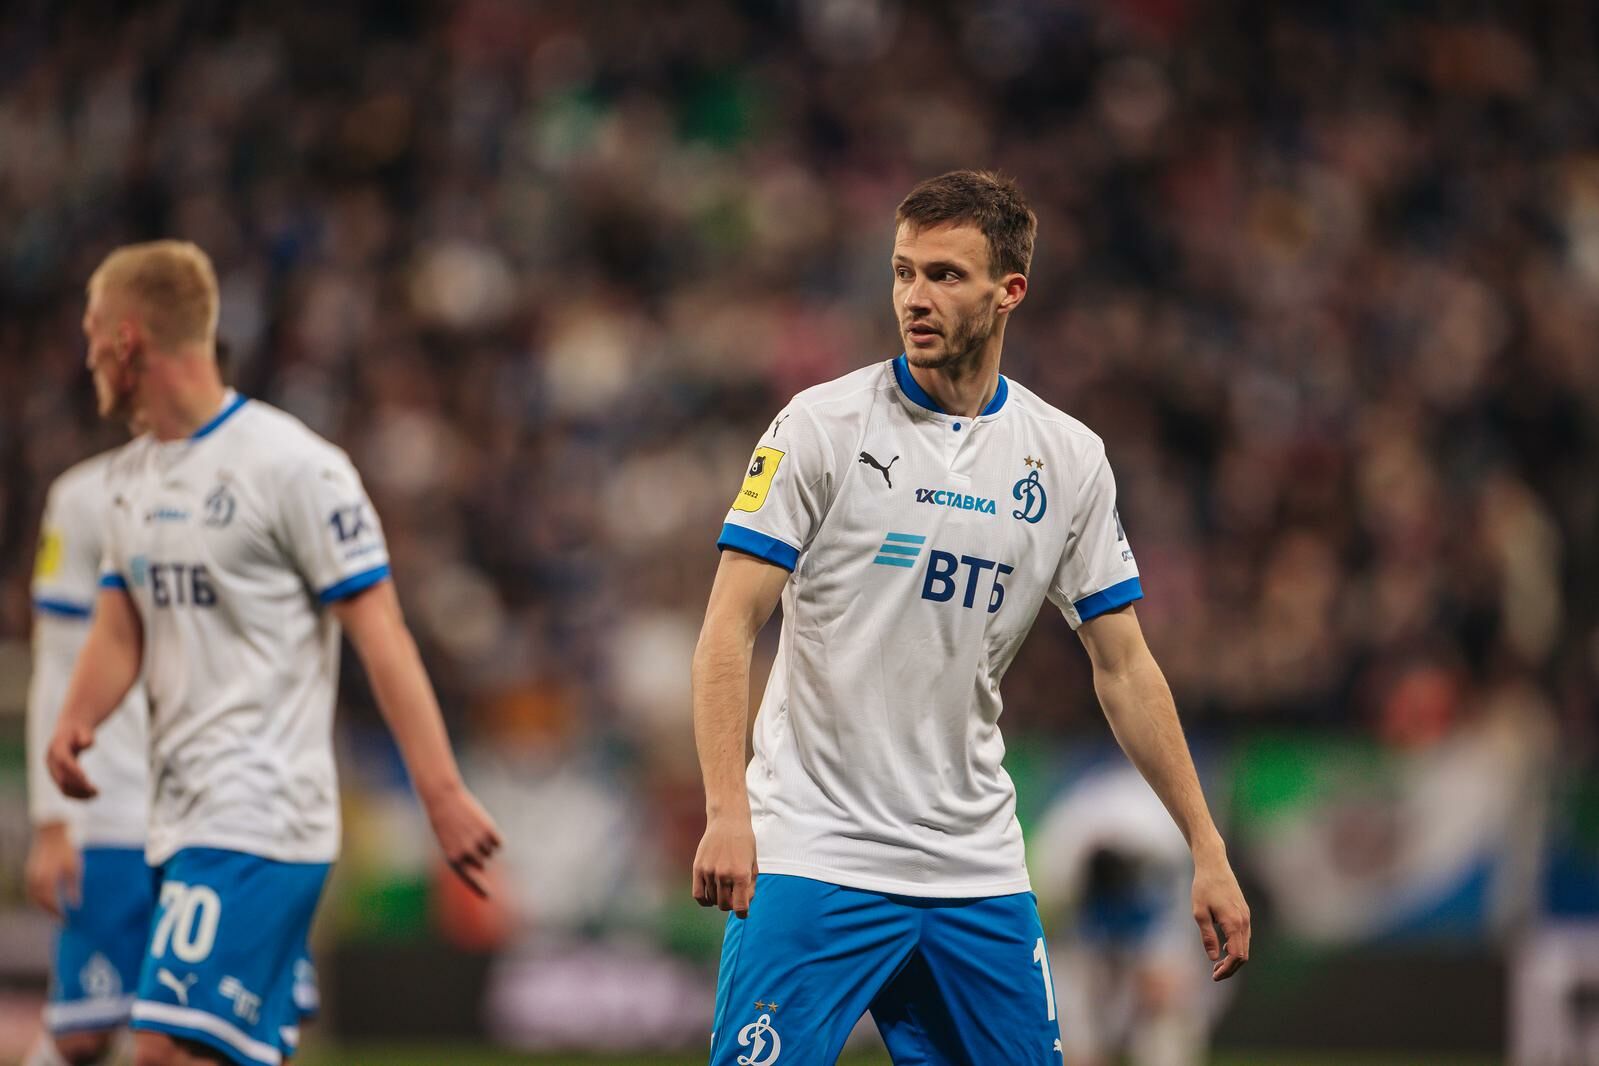 Daniil Lesovoy: It’s hard to play against Sochi in the RPL